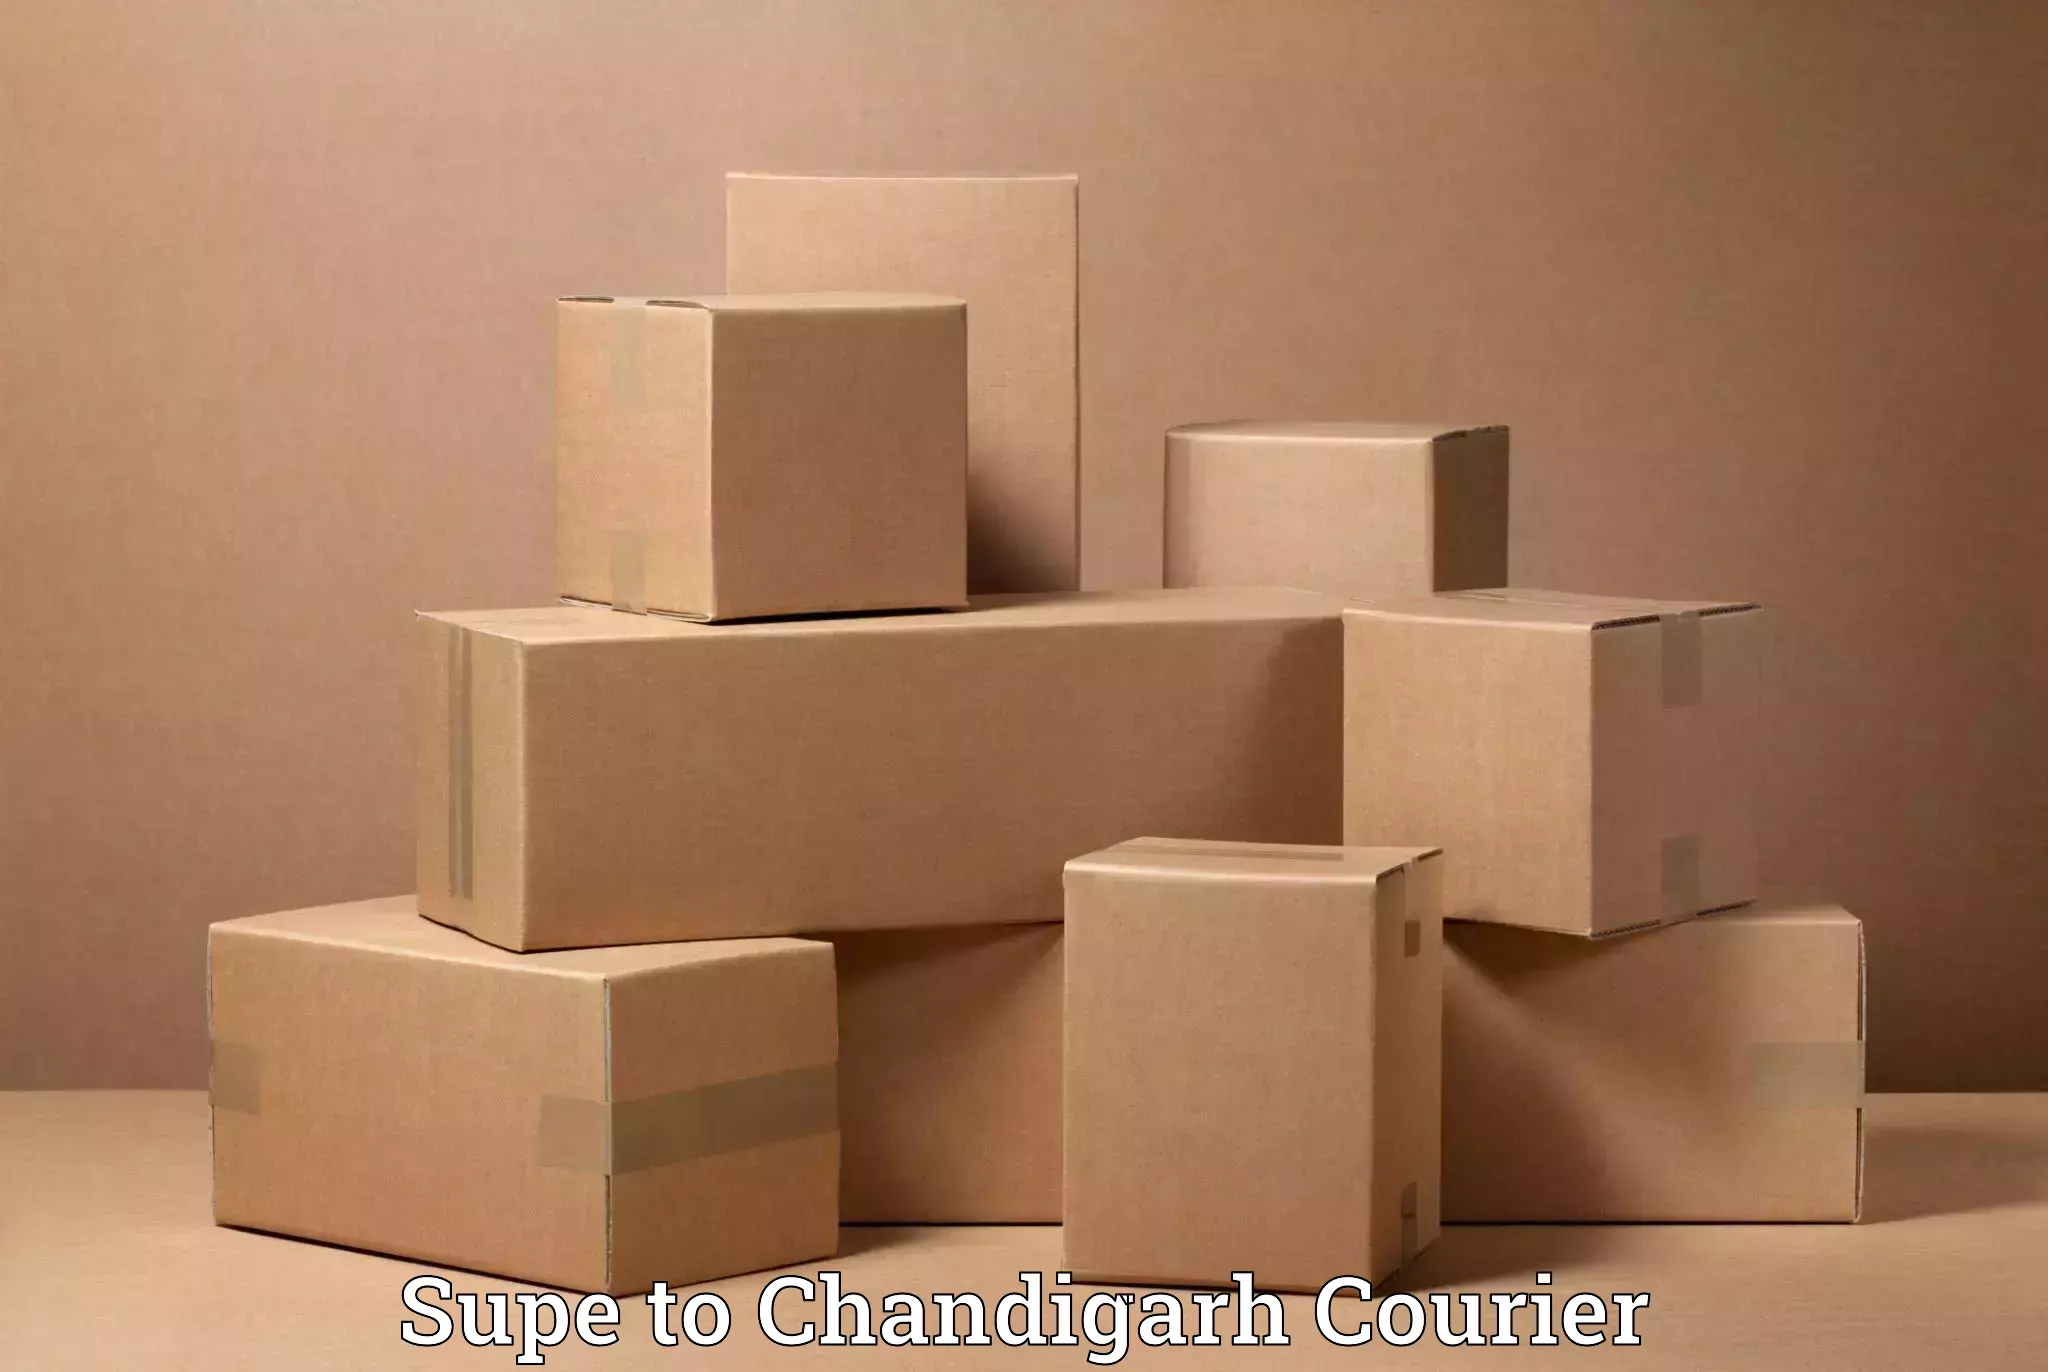 Household moving experts Supe to Chandigarh